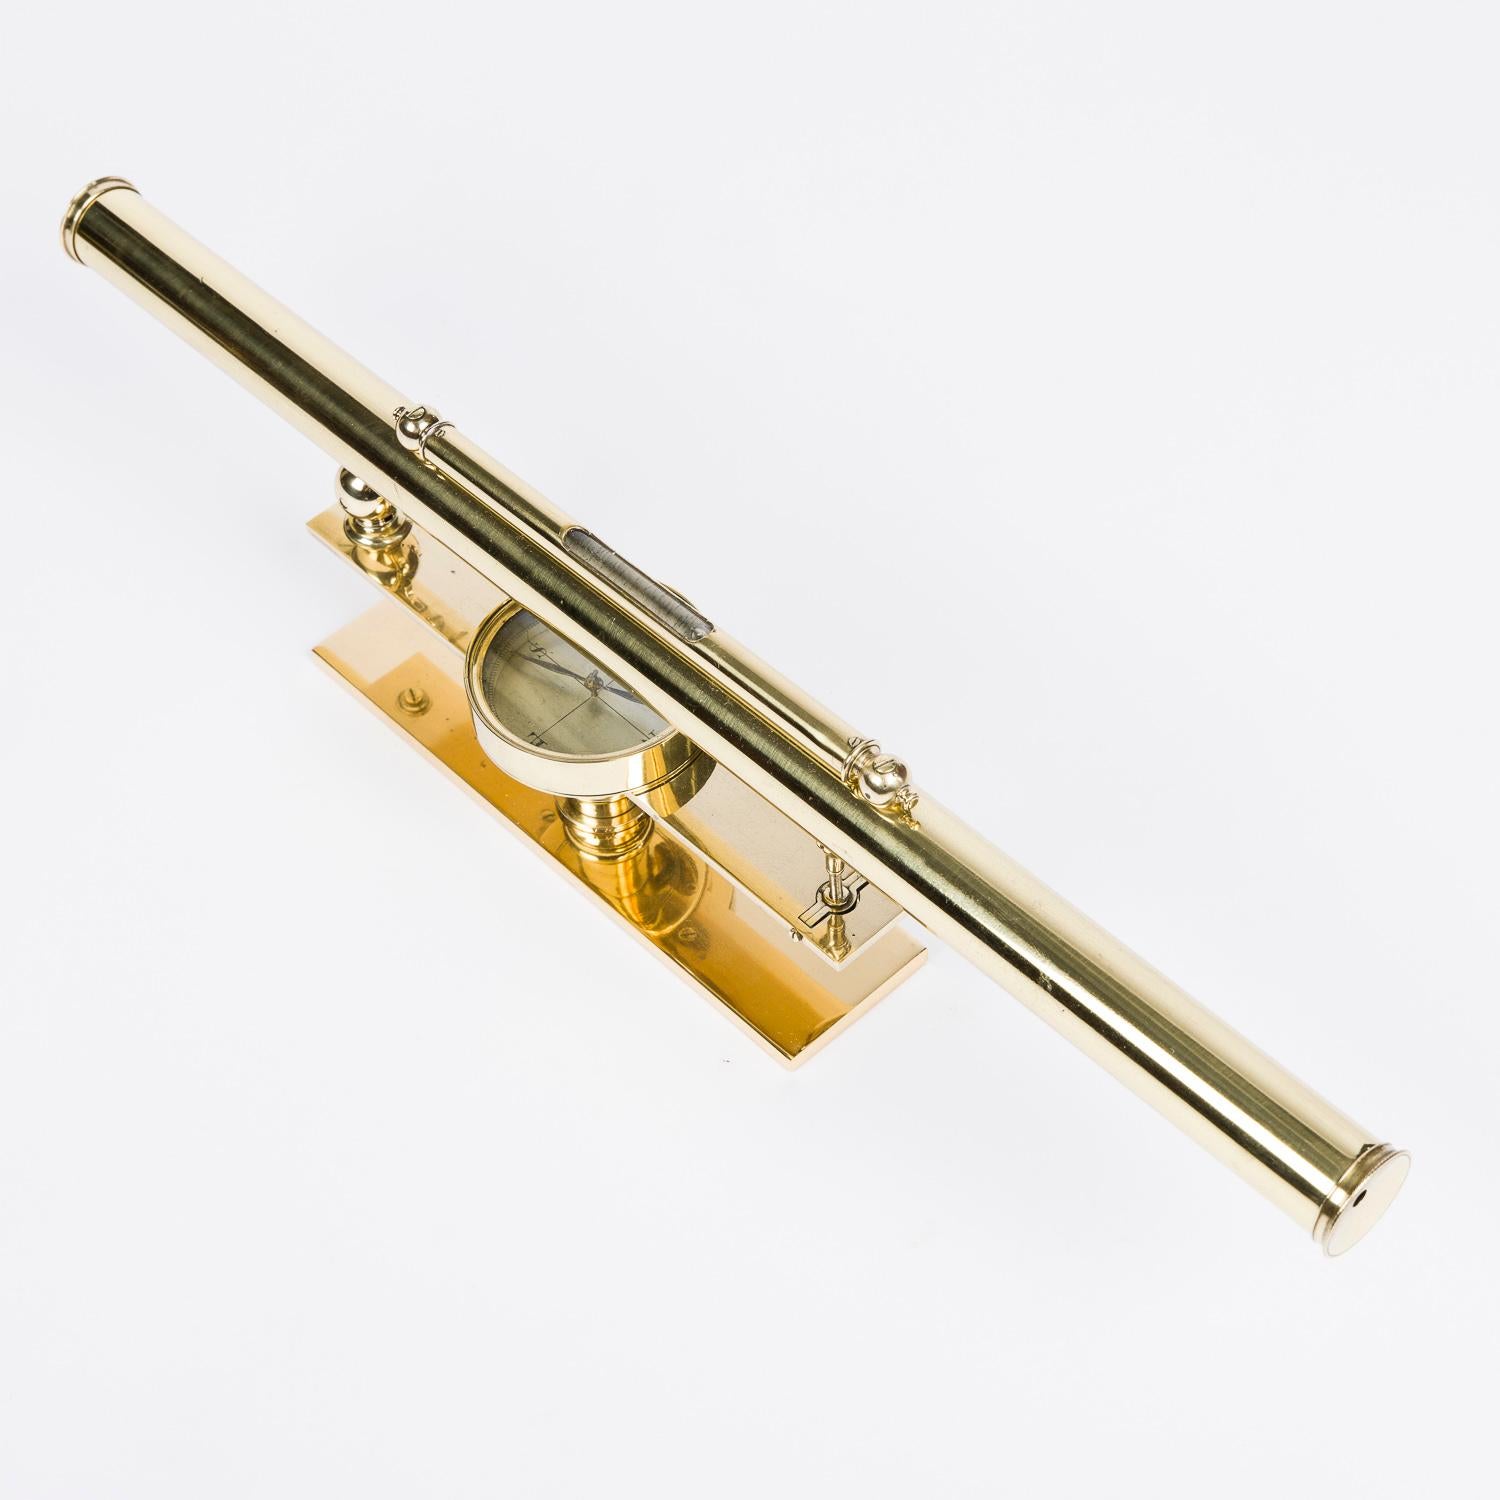 An early 19th century brass surveyor's level with telescope, compass and spirit level.

With original brass mounted pine case.

Telescope length: 18 1/4 inches. - 46.5 cm.

Fitting for tripod mount, now re-mounted on a modern brass plate for desk